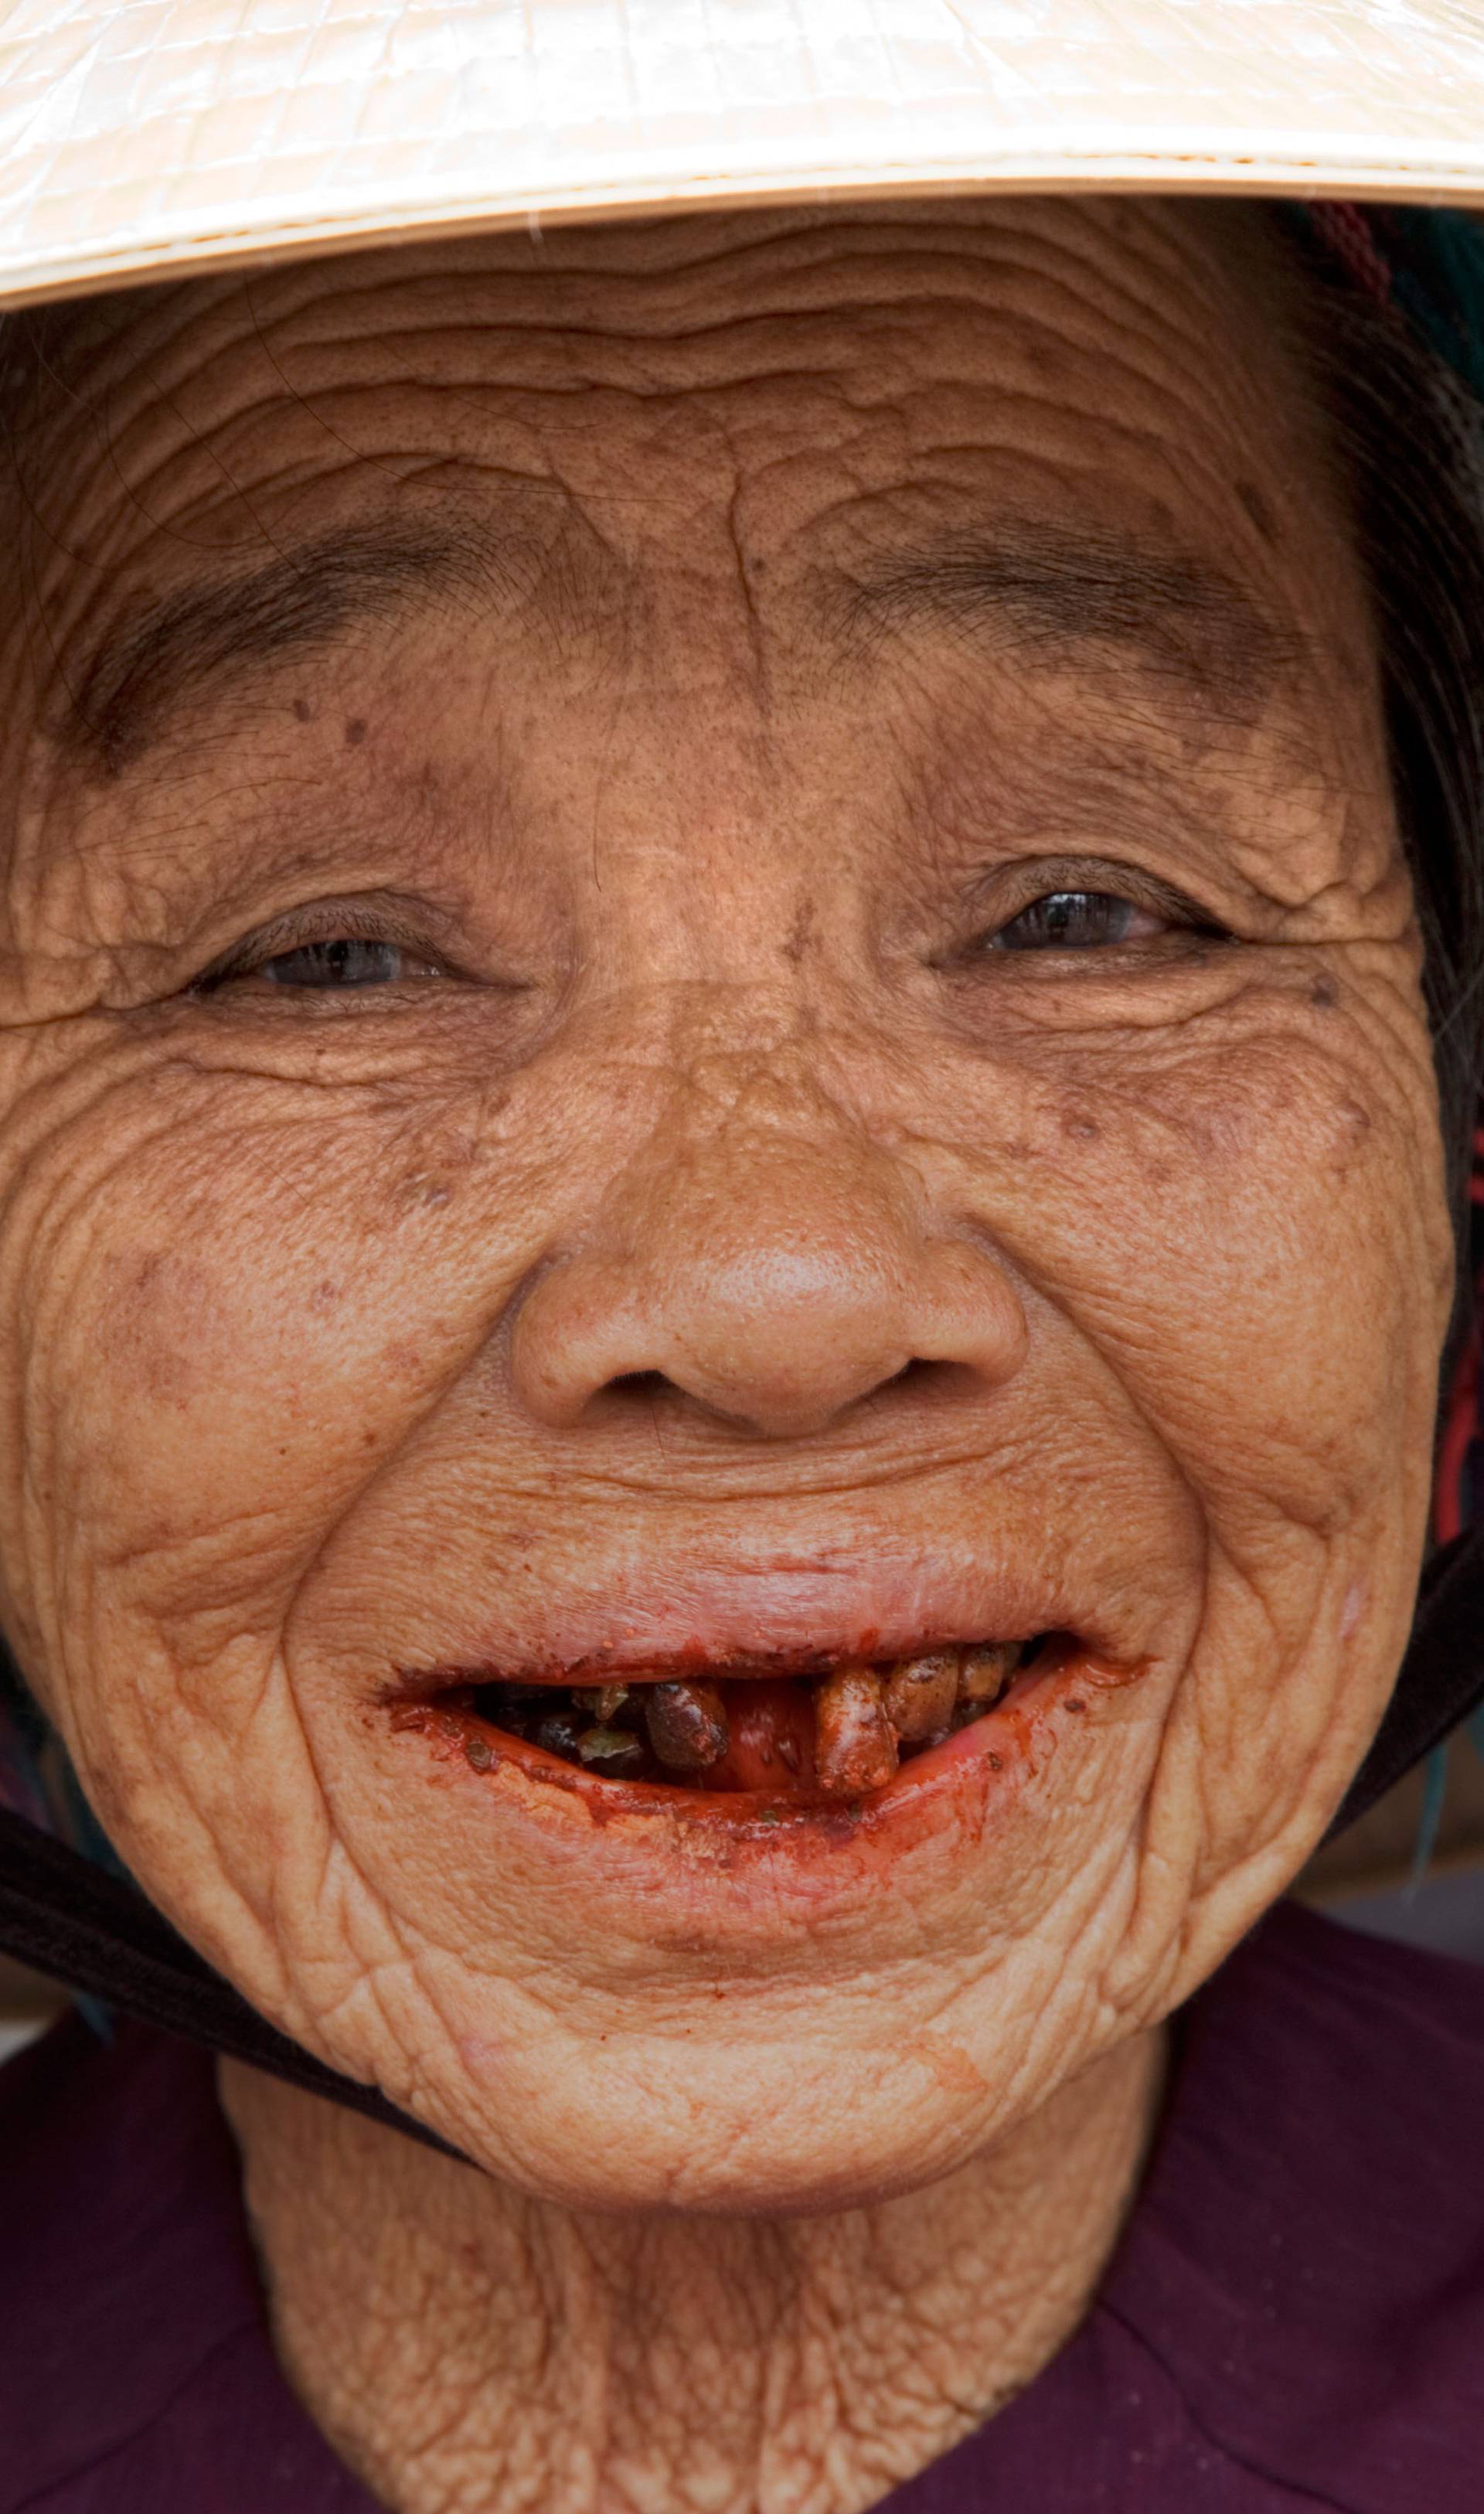 Aged woman with red betel nut stains in her mouth, Hoi An, Vietnam